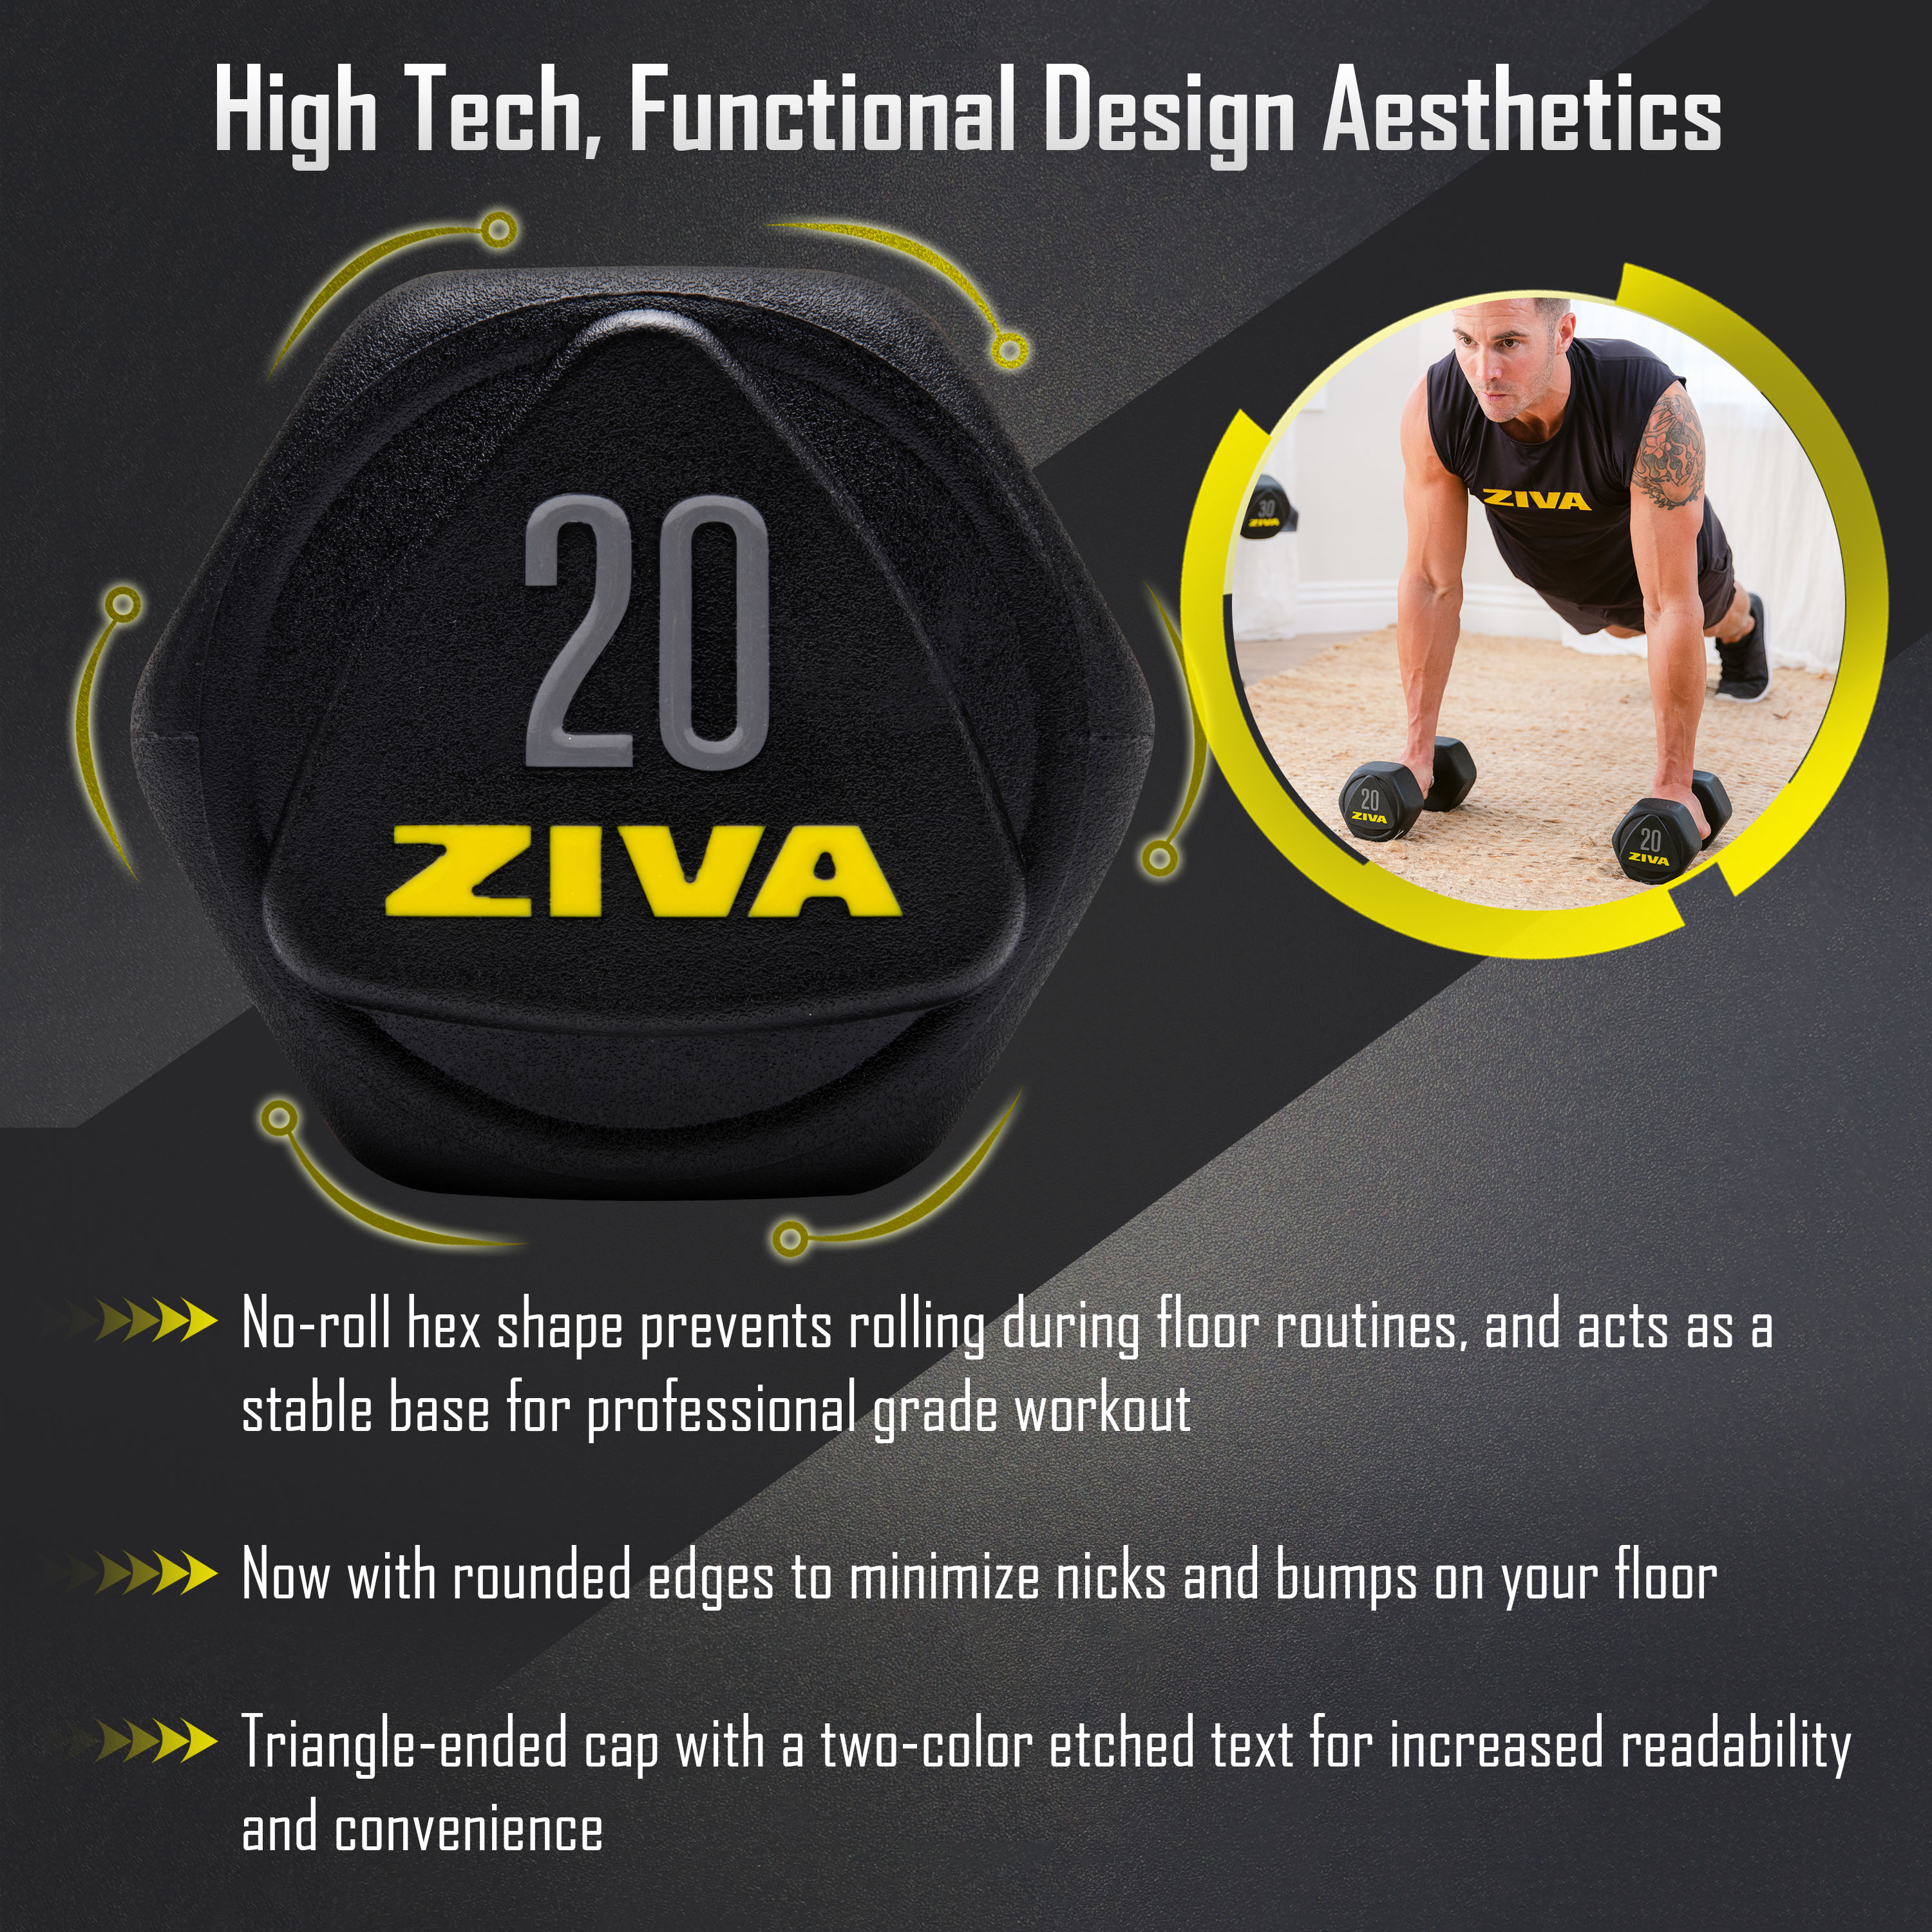 High tech, functional design aesthetics. No-roll hex shape prevents rolling during floor routines, and acts as a stable base for professional grad workout. Now with rounded edges to minimize nicks and bumps on your floor. Triangle-ended cap with a two color etched text for increased readability and convenience.